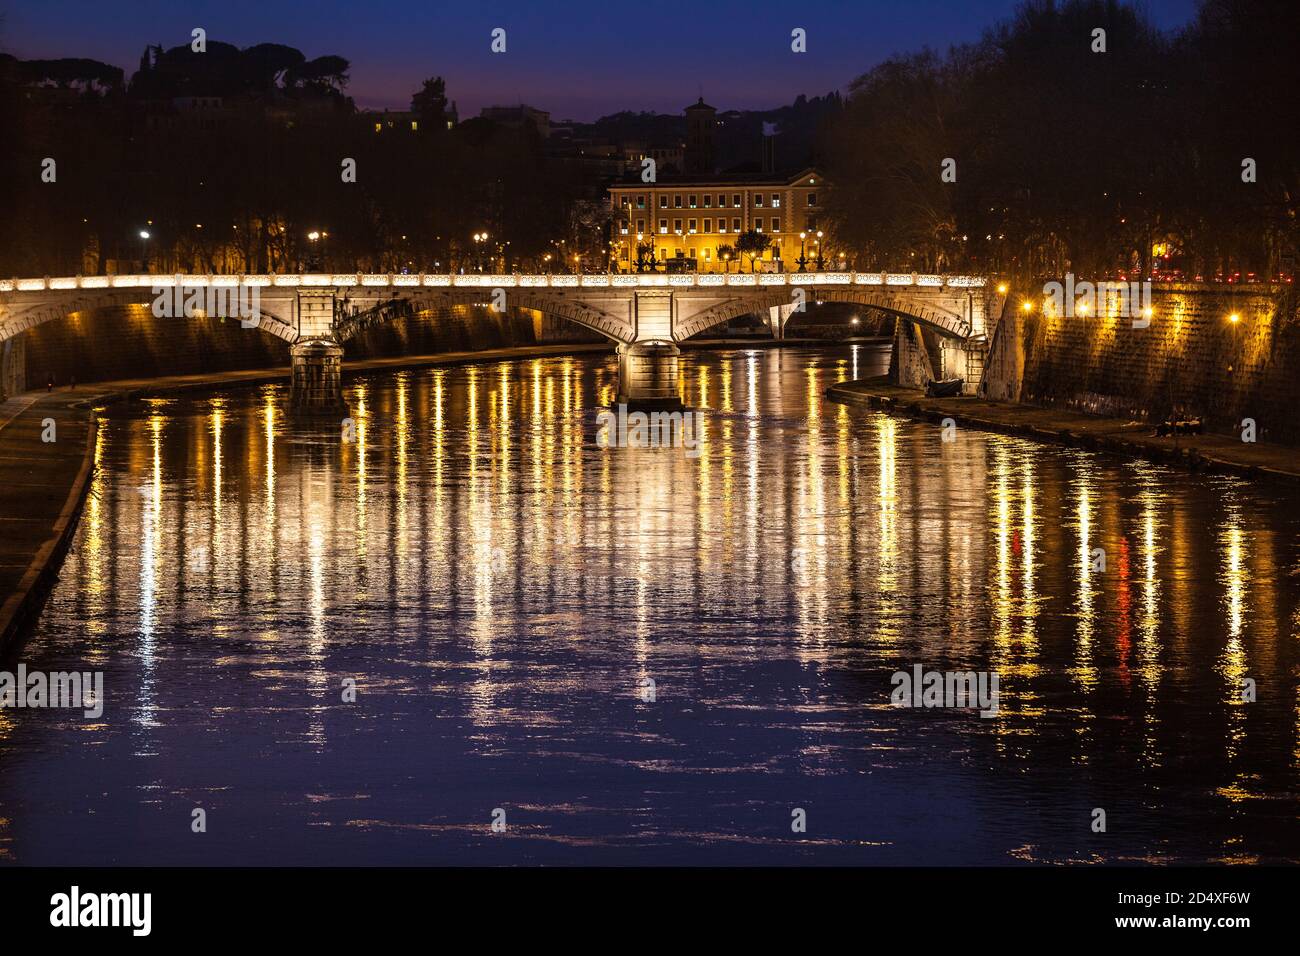 Tiber River, bridge. Ponte Giuseppe Mazzini. Reflections on water. Night. Rome, Italy. Historical building at the top. Stock Photo